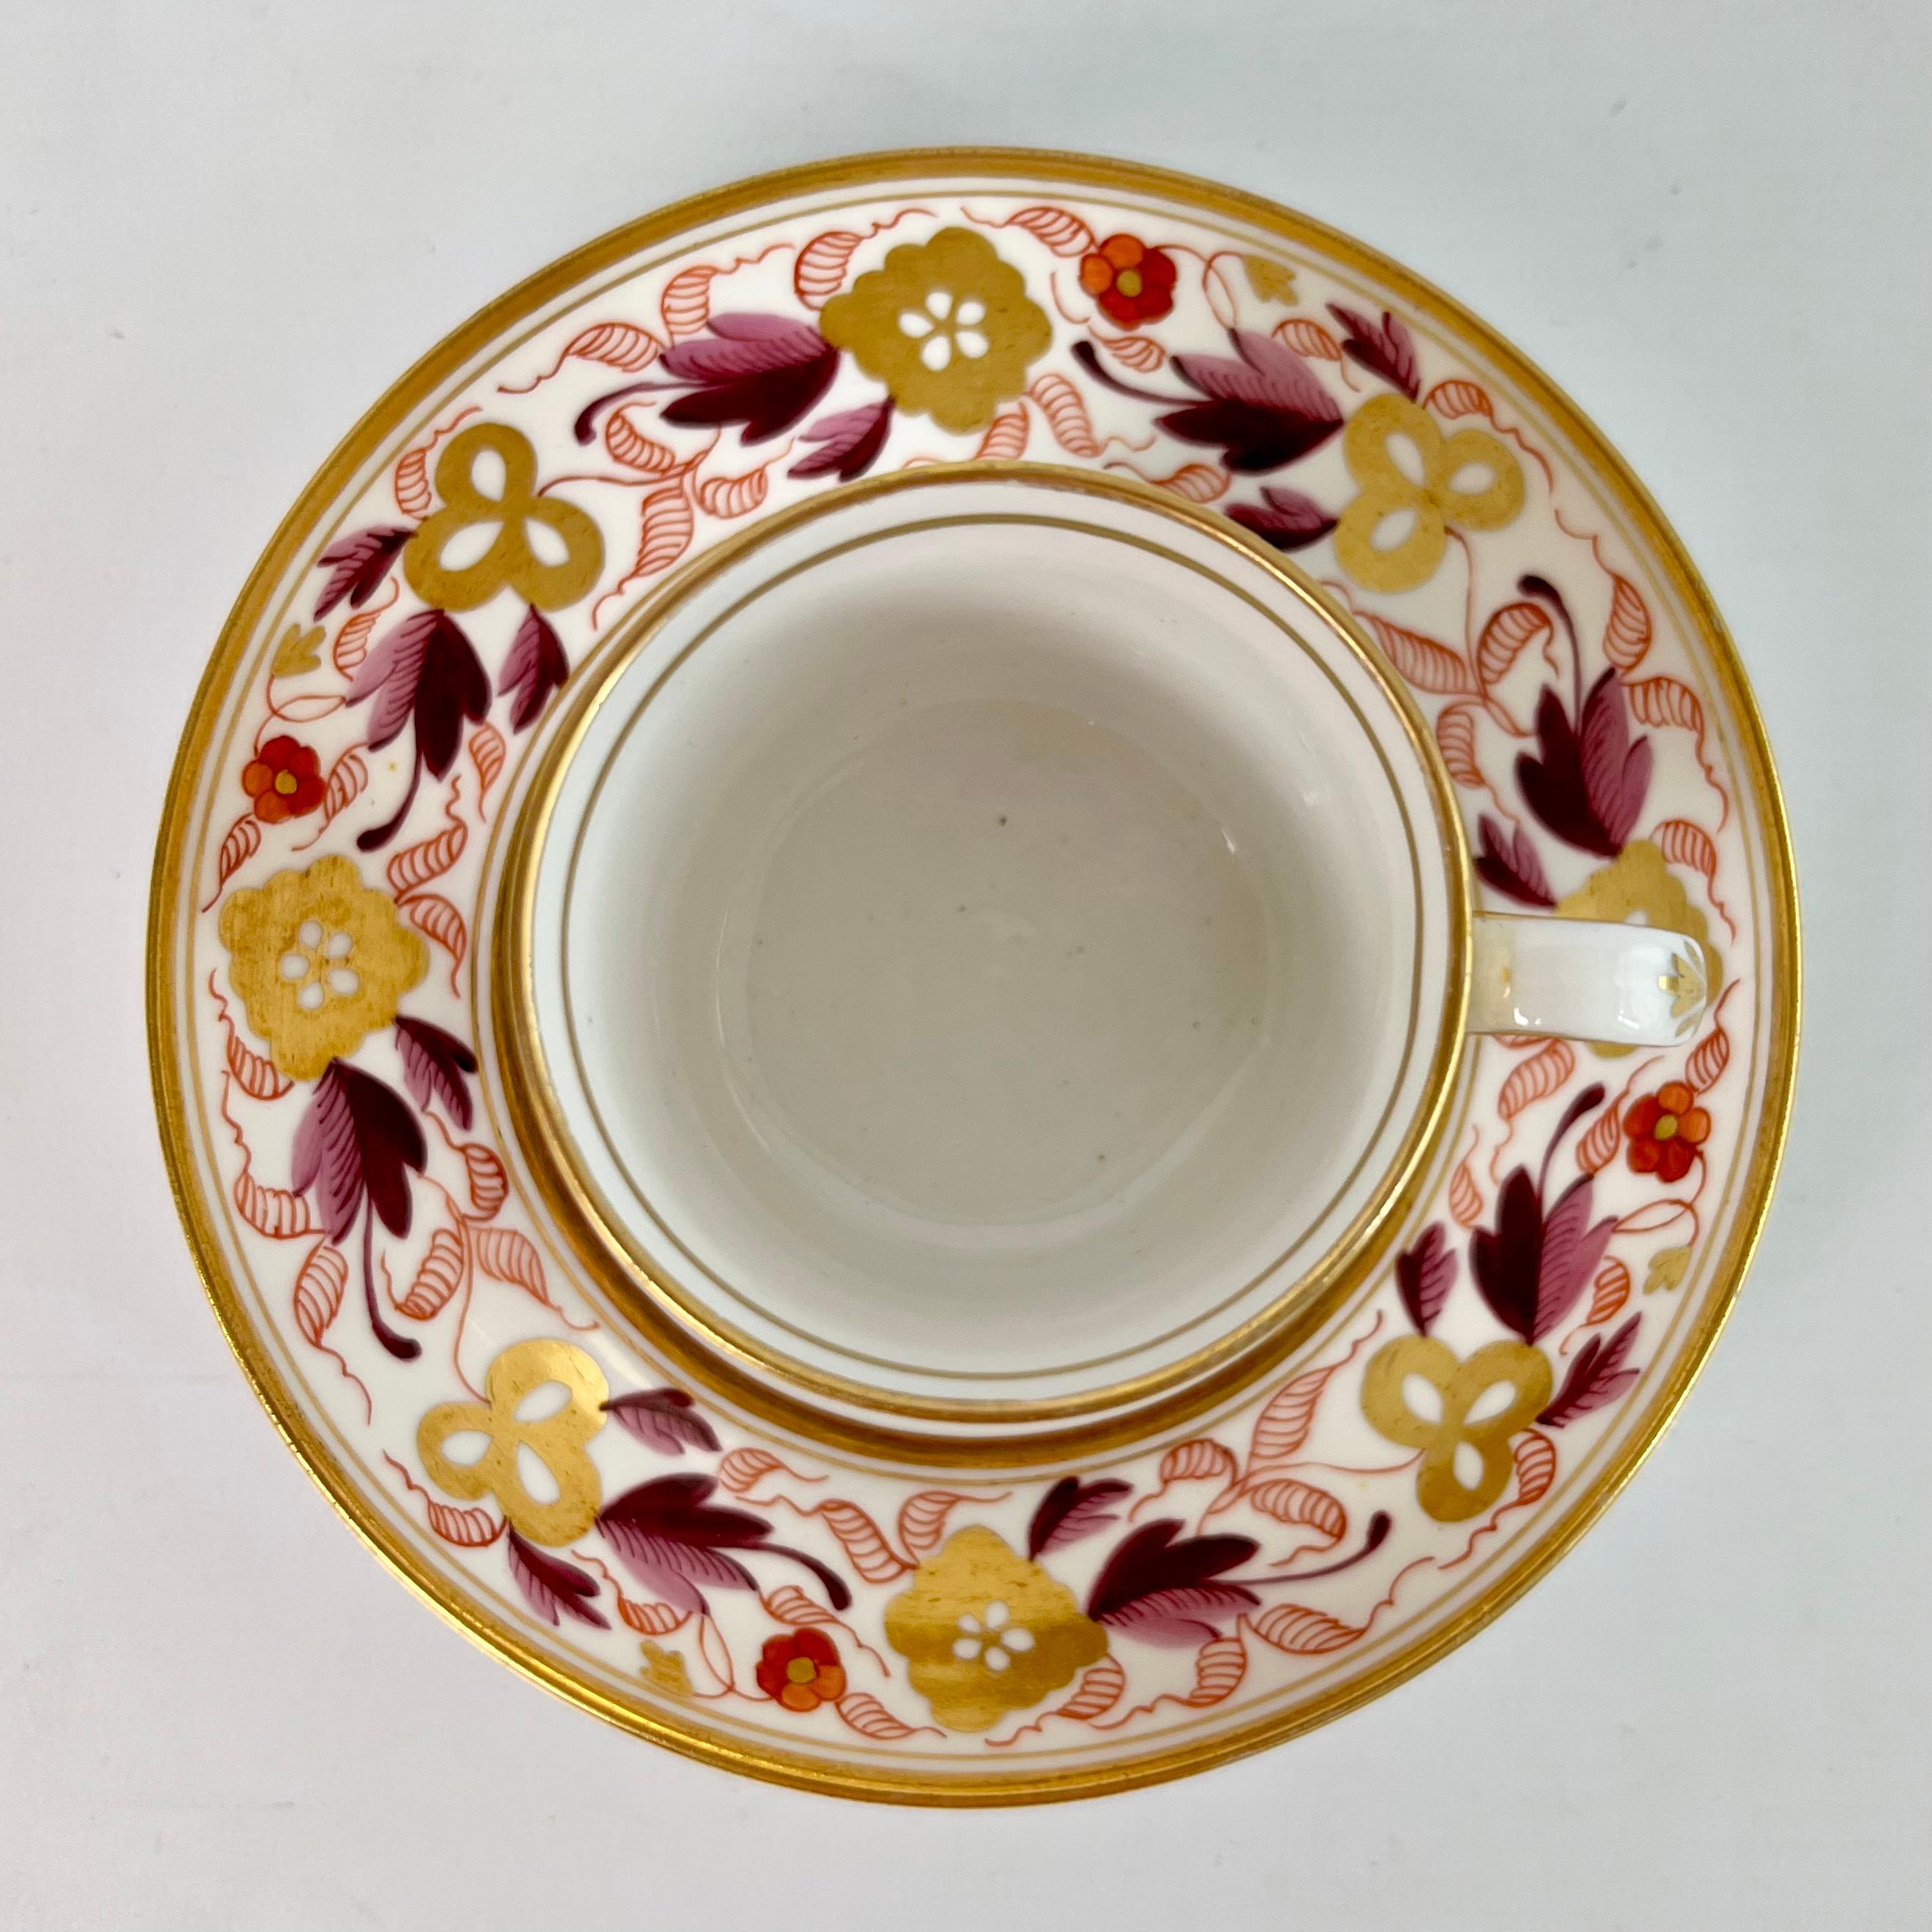 Spode Porcelain Teacup Trio, Puce and Gilt Floral Pattern, Neoclassical ca 1810 2